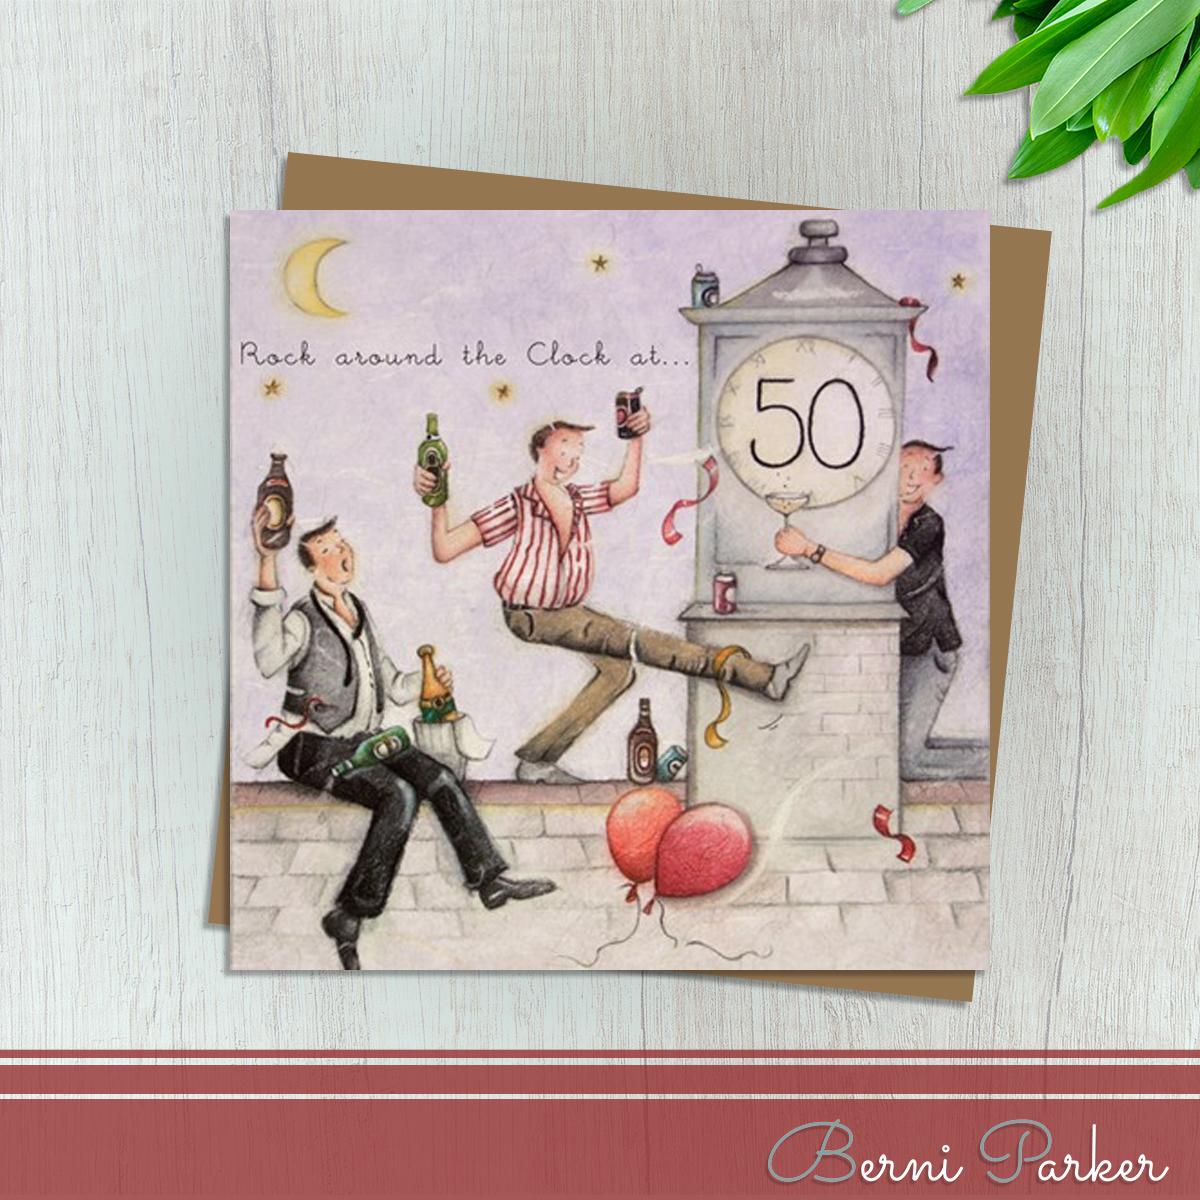 Showing Three Guys Partying On A Rooftop. The Clock Says 50. Caption: Rock Around The Clock At 50. Blank Inside For Your Own Message. Complete With Brown Kraft Envelope